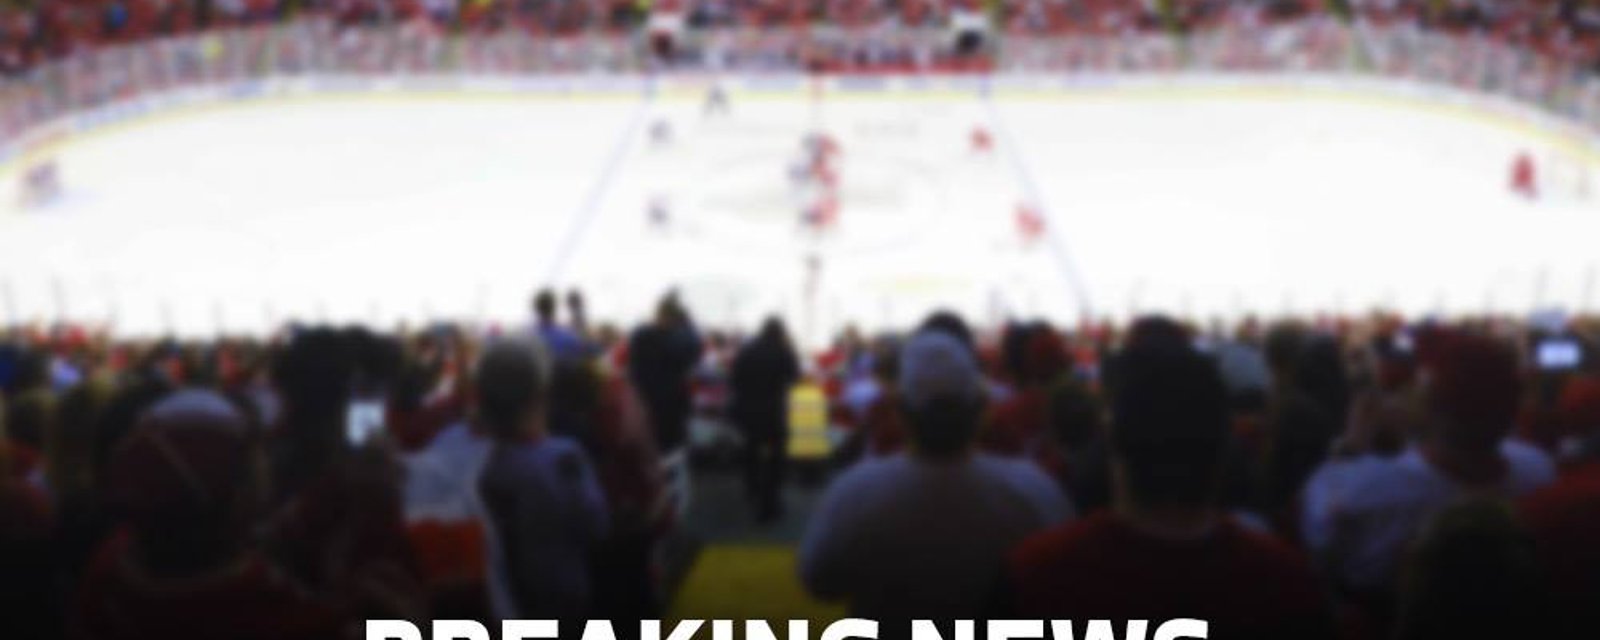 Breaking: NHL team fires almost its entire coaching staff!